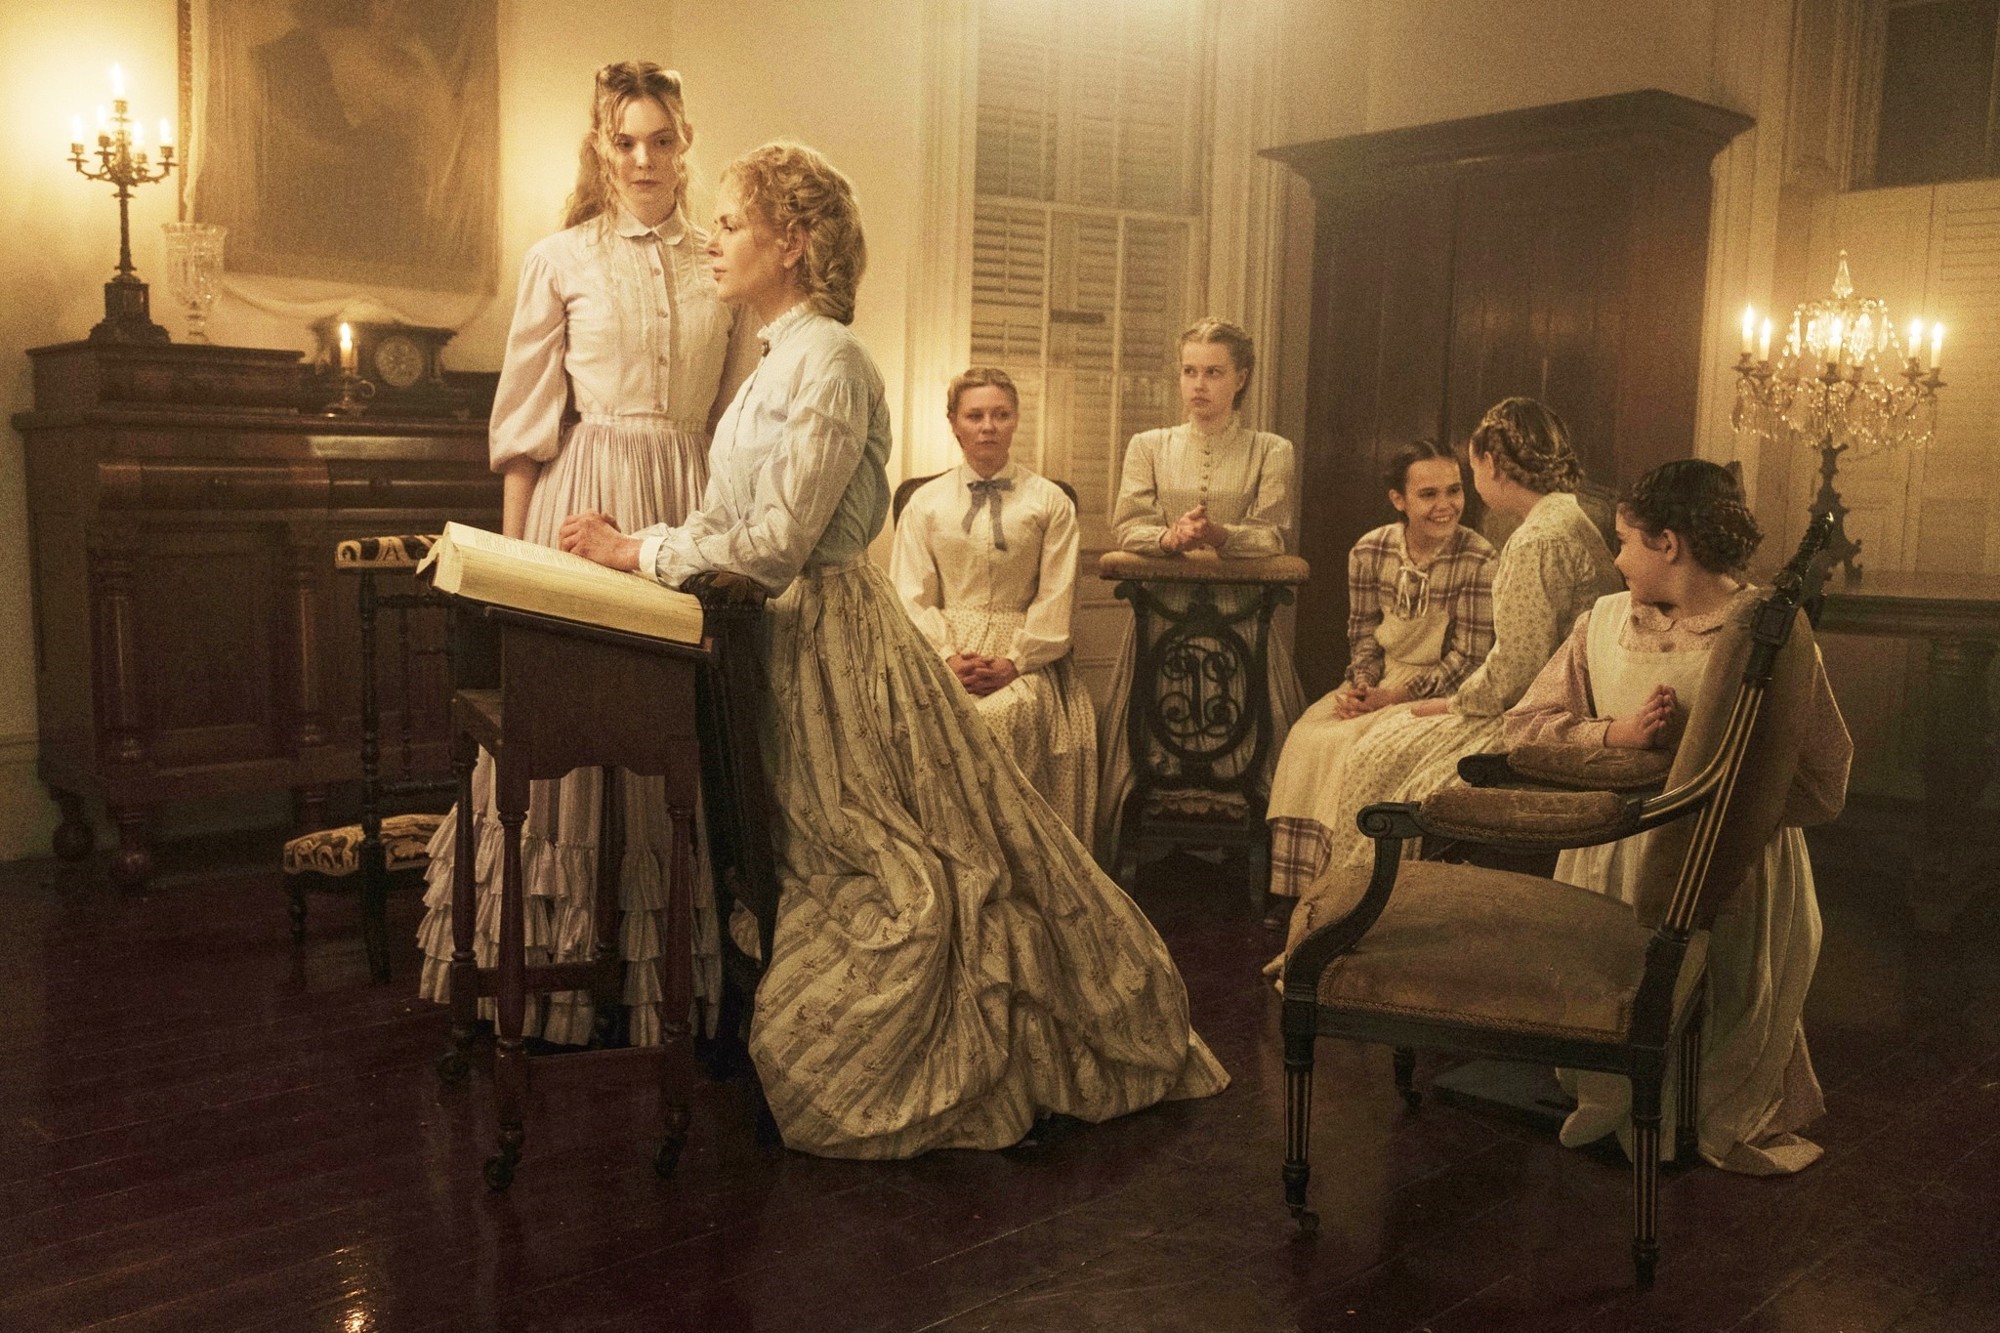 Elle Fanning, Nicole Kidman, Kirsten Dunst, Angourie Rice and Oona Laurence in Focus Features' The Beguiled (2017)